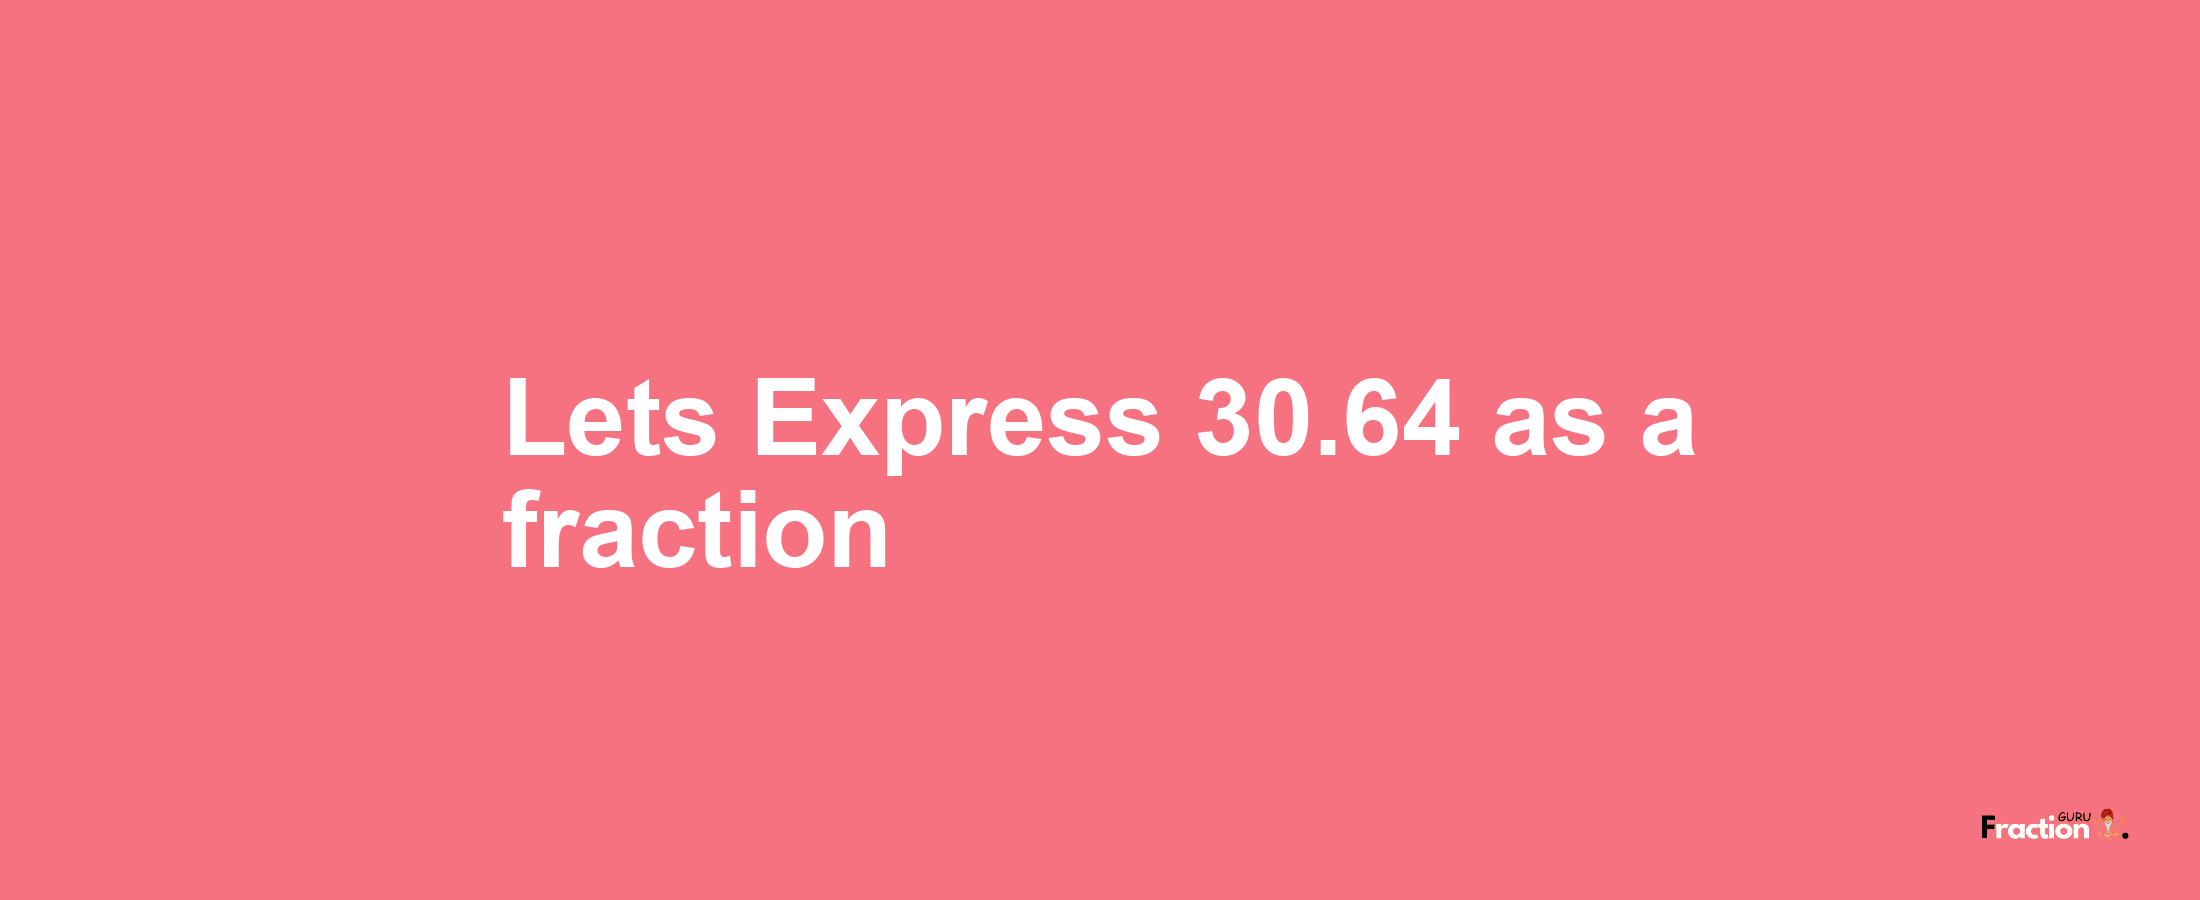 Lets Express 30.64 as afraction